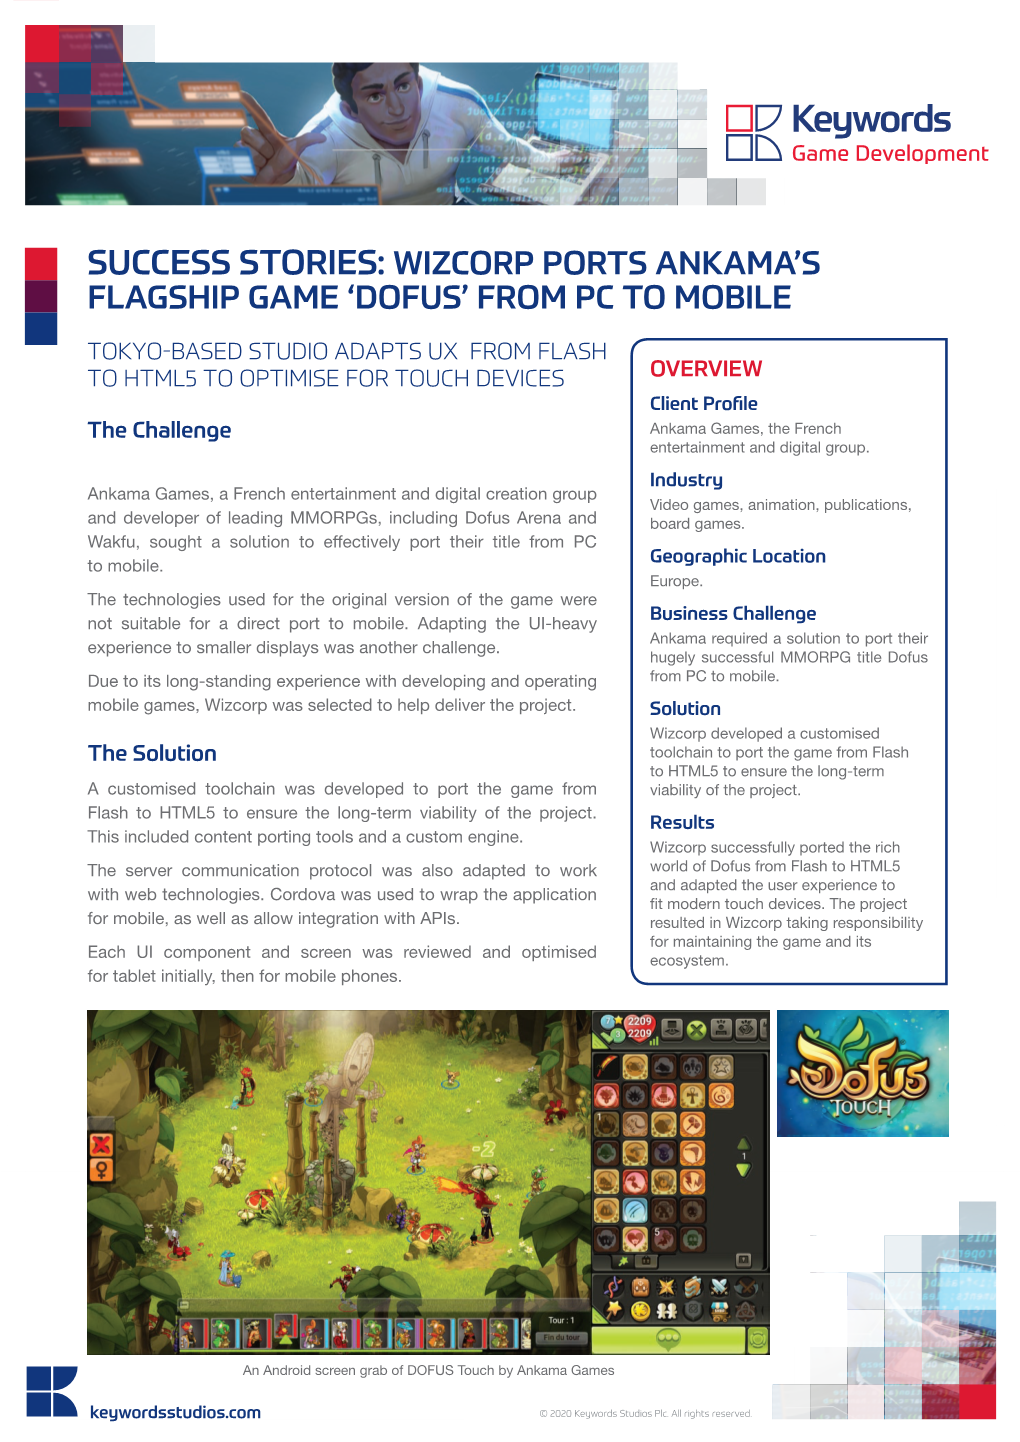 Wizcorp Ports Ankama's Flagship Game